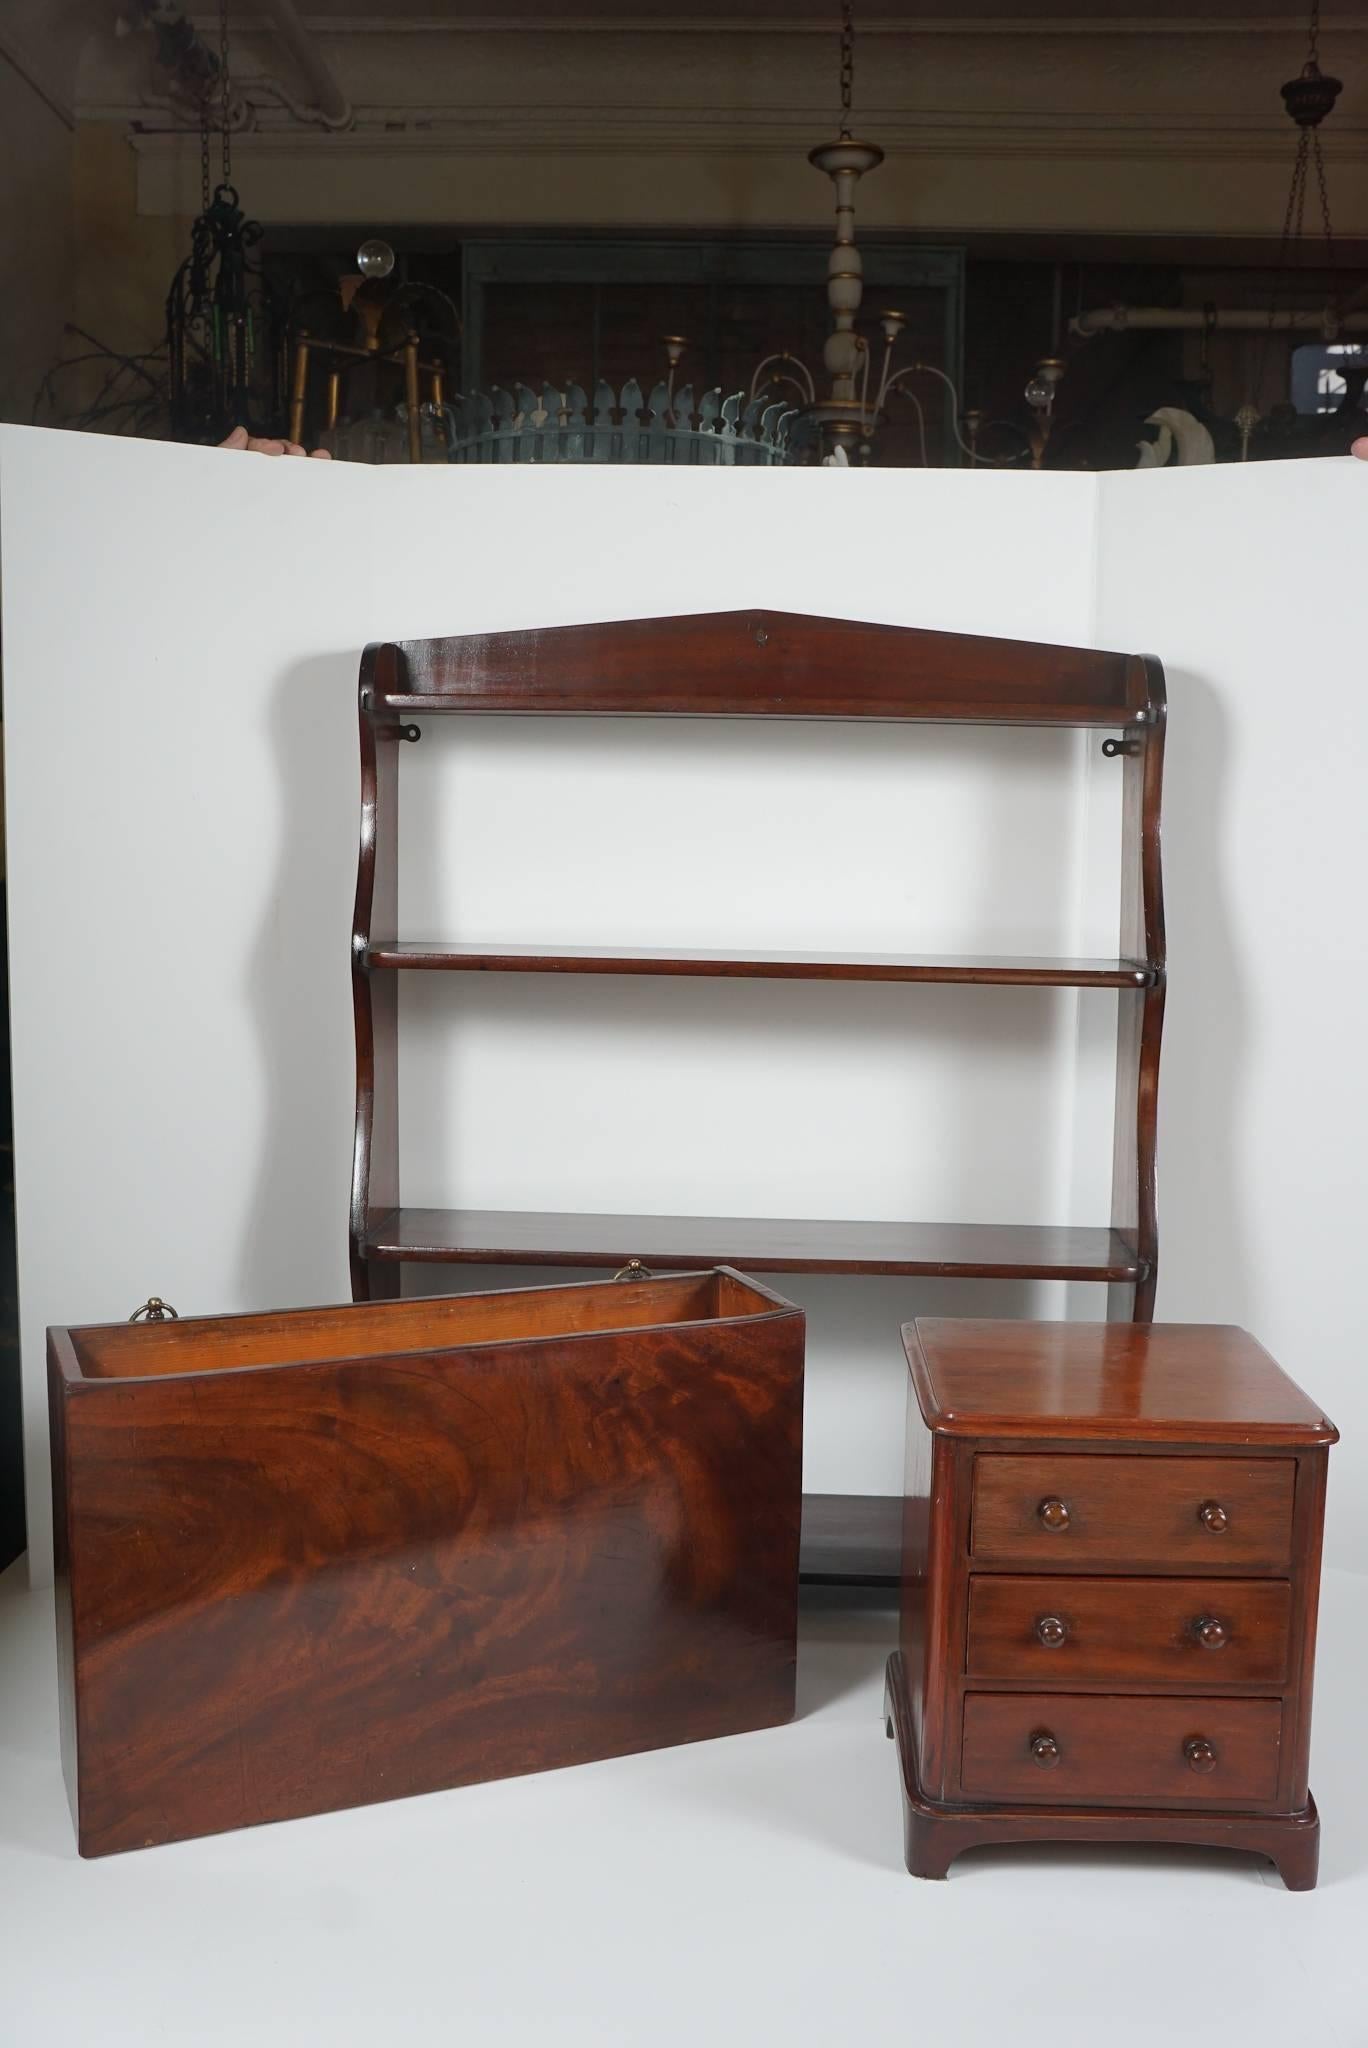 This collection comes from the estate of Paul & Bunny Mellon from their home Oak Spring Farms in Charlottesville Va. This grouping consists of a Mahogany hanging shelf from the late regency period. Designed with four shelves used to display small